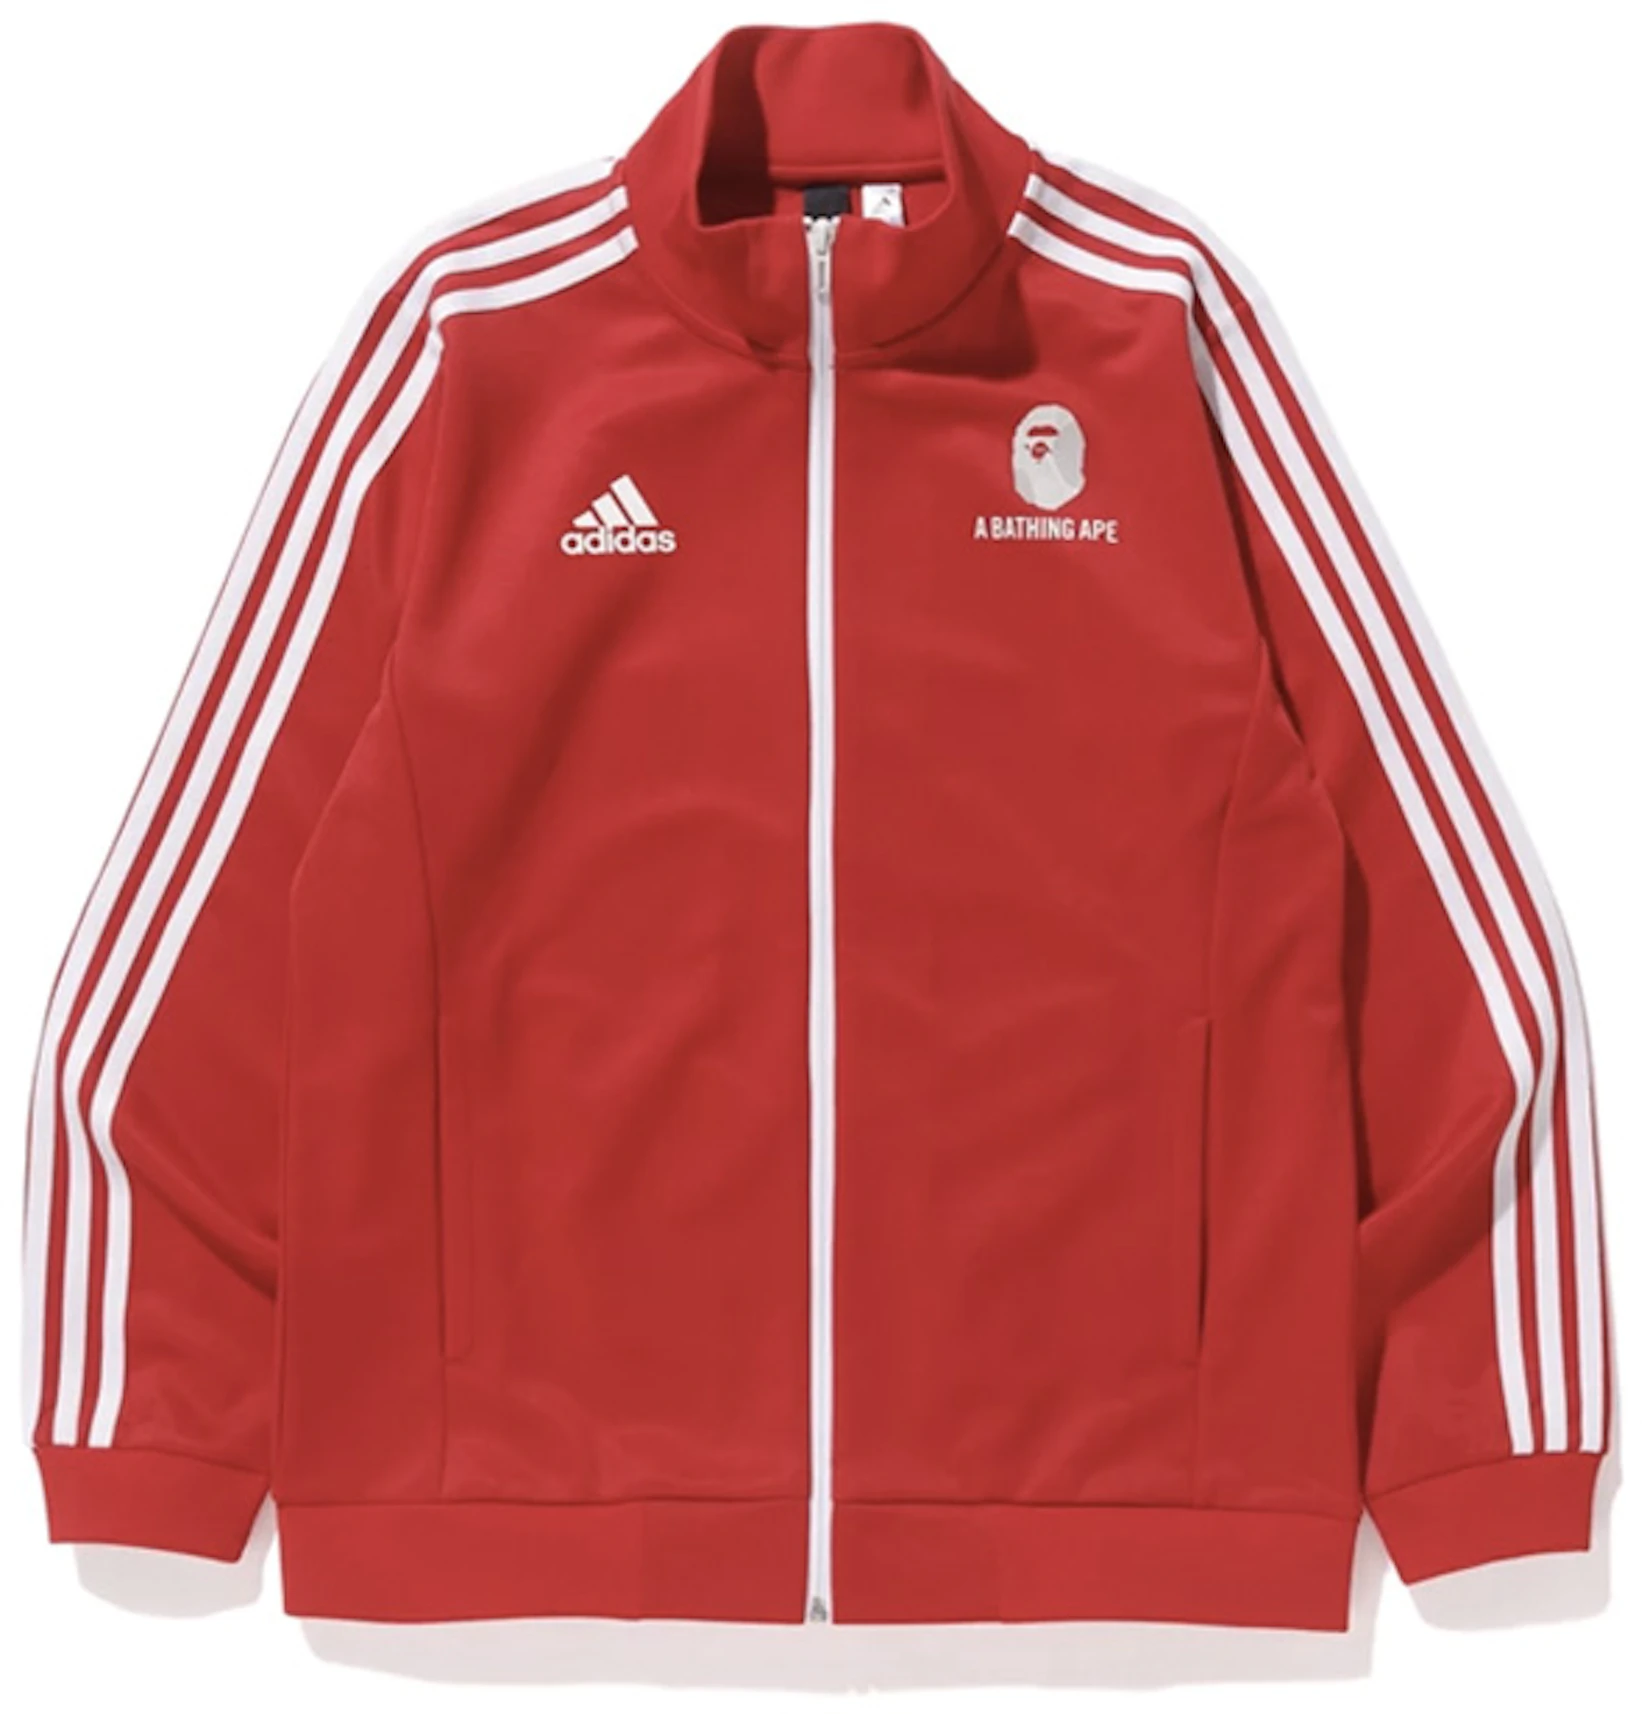 BAPE x adidas Cup 2018 Winning Collection Zip Track Jacket Red - SS18 - ES